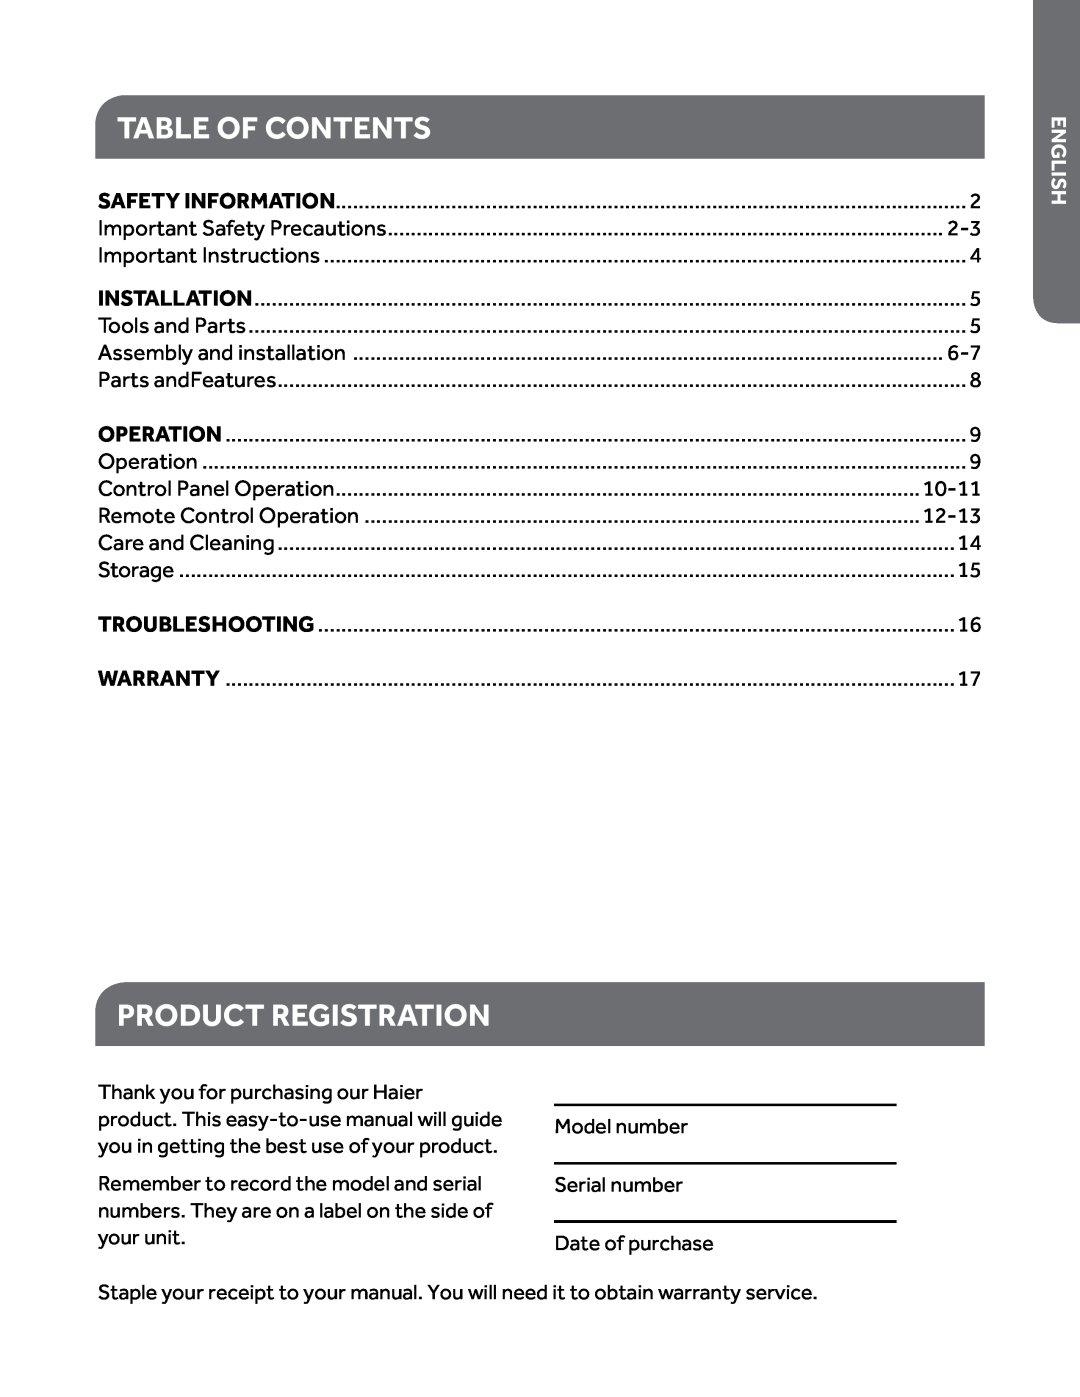 Haier HPY08XCM manual table of contents, Product Registration, h Englis 